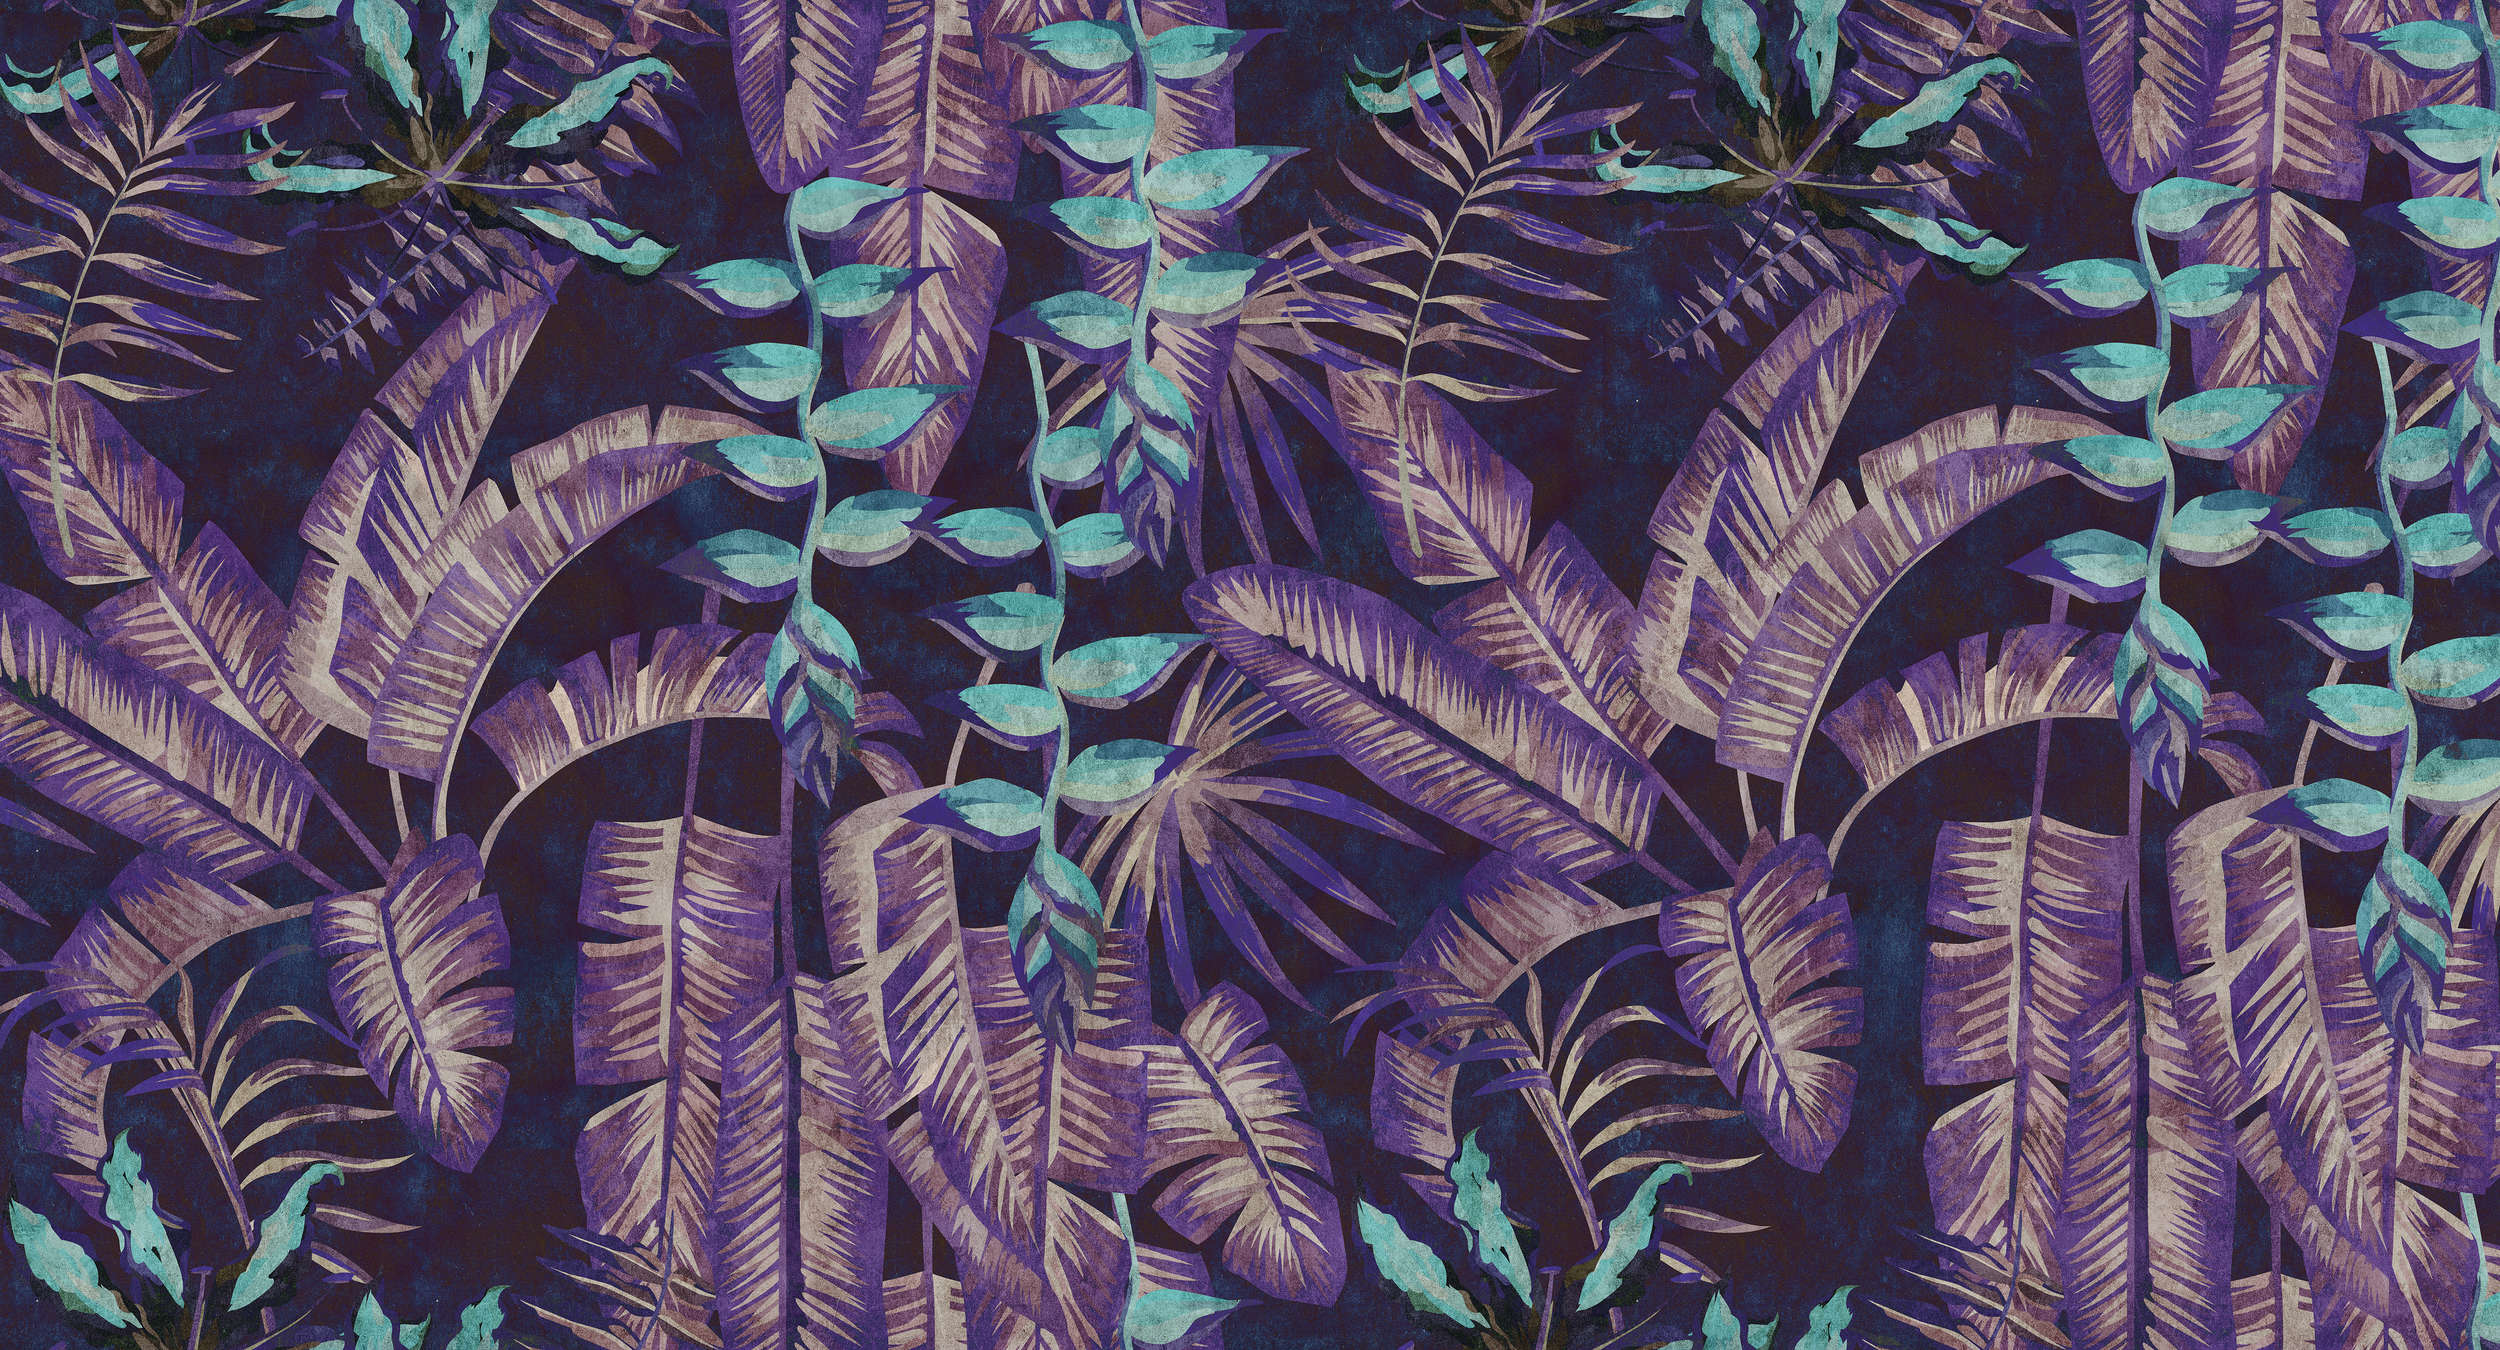             Tropicana 6 - digital print wallpaper in blotting paper structure with jungle motif - turquoise, violet | structure non-woven
        